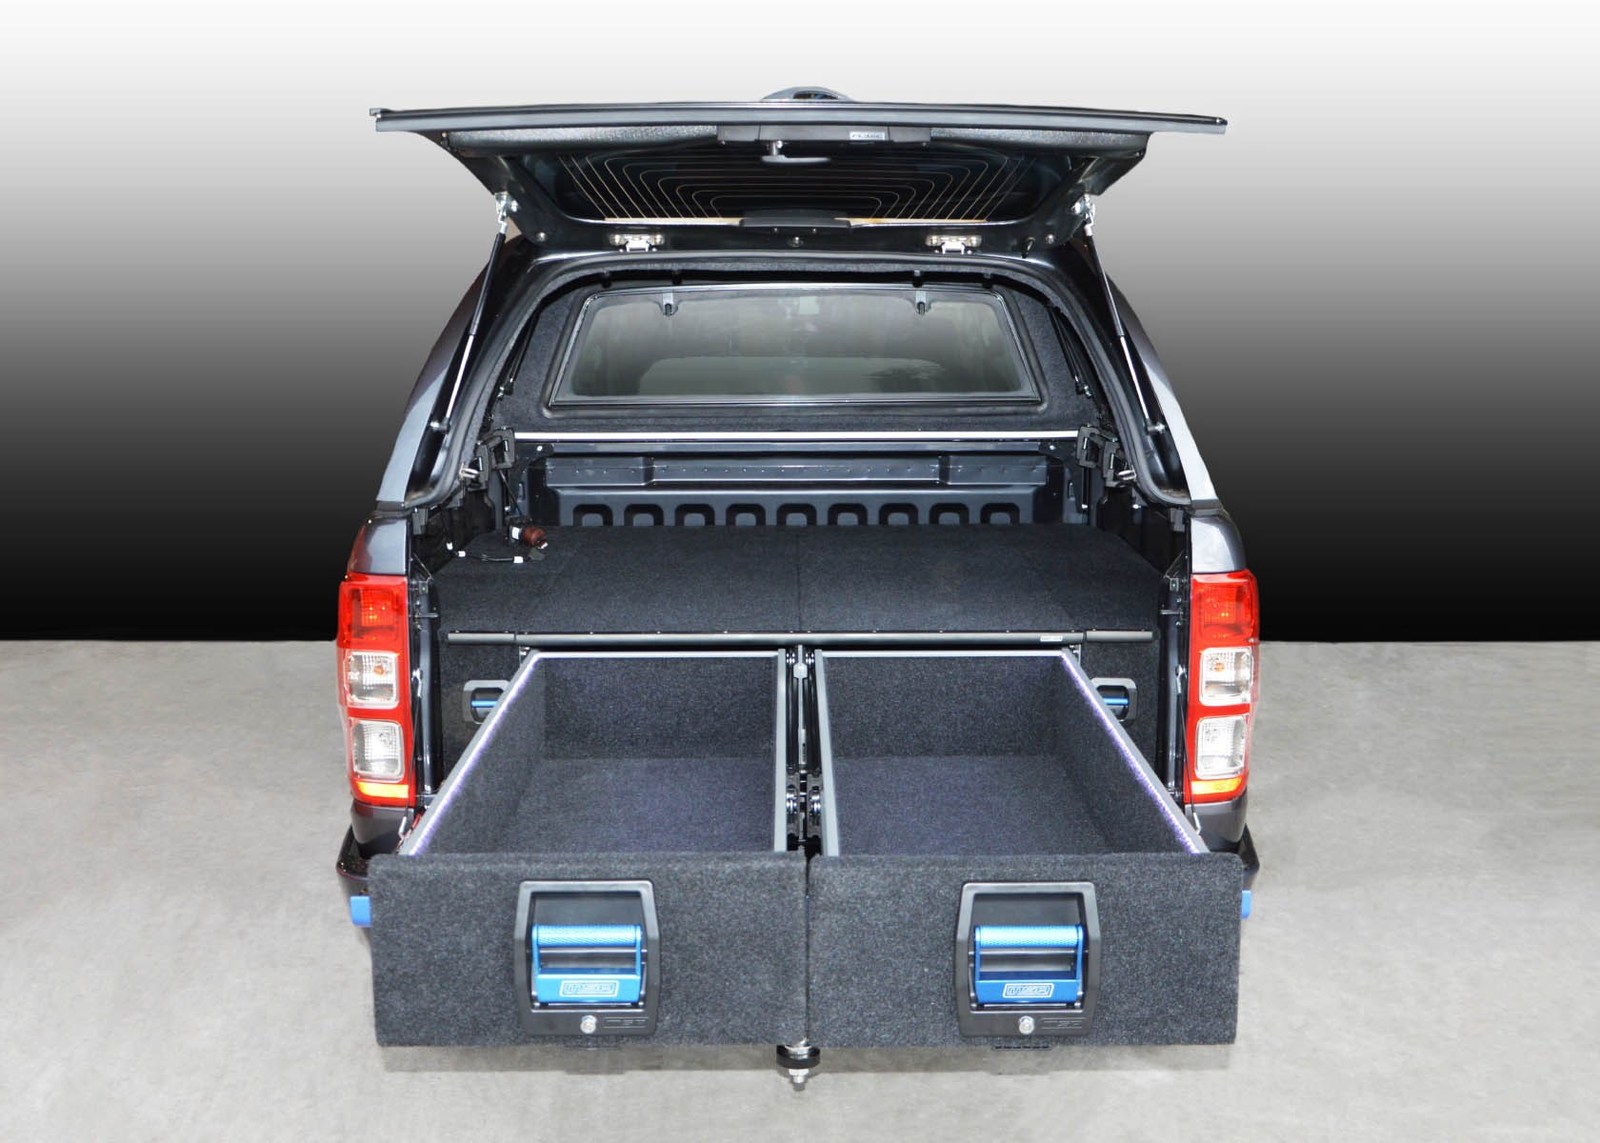 MSA 4X4 1350 COMPLETE DOUBLE DRAWER SYSTEM TO SUIT FORD RANGER & MAZDA BT50 (2011-2021)